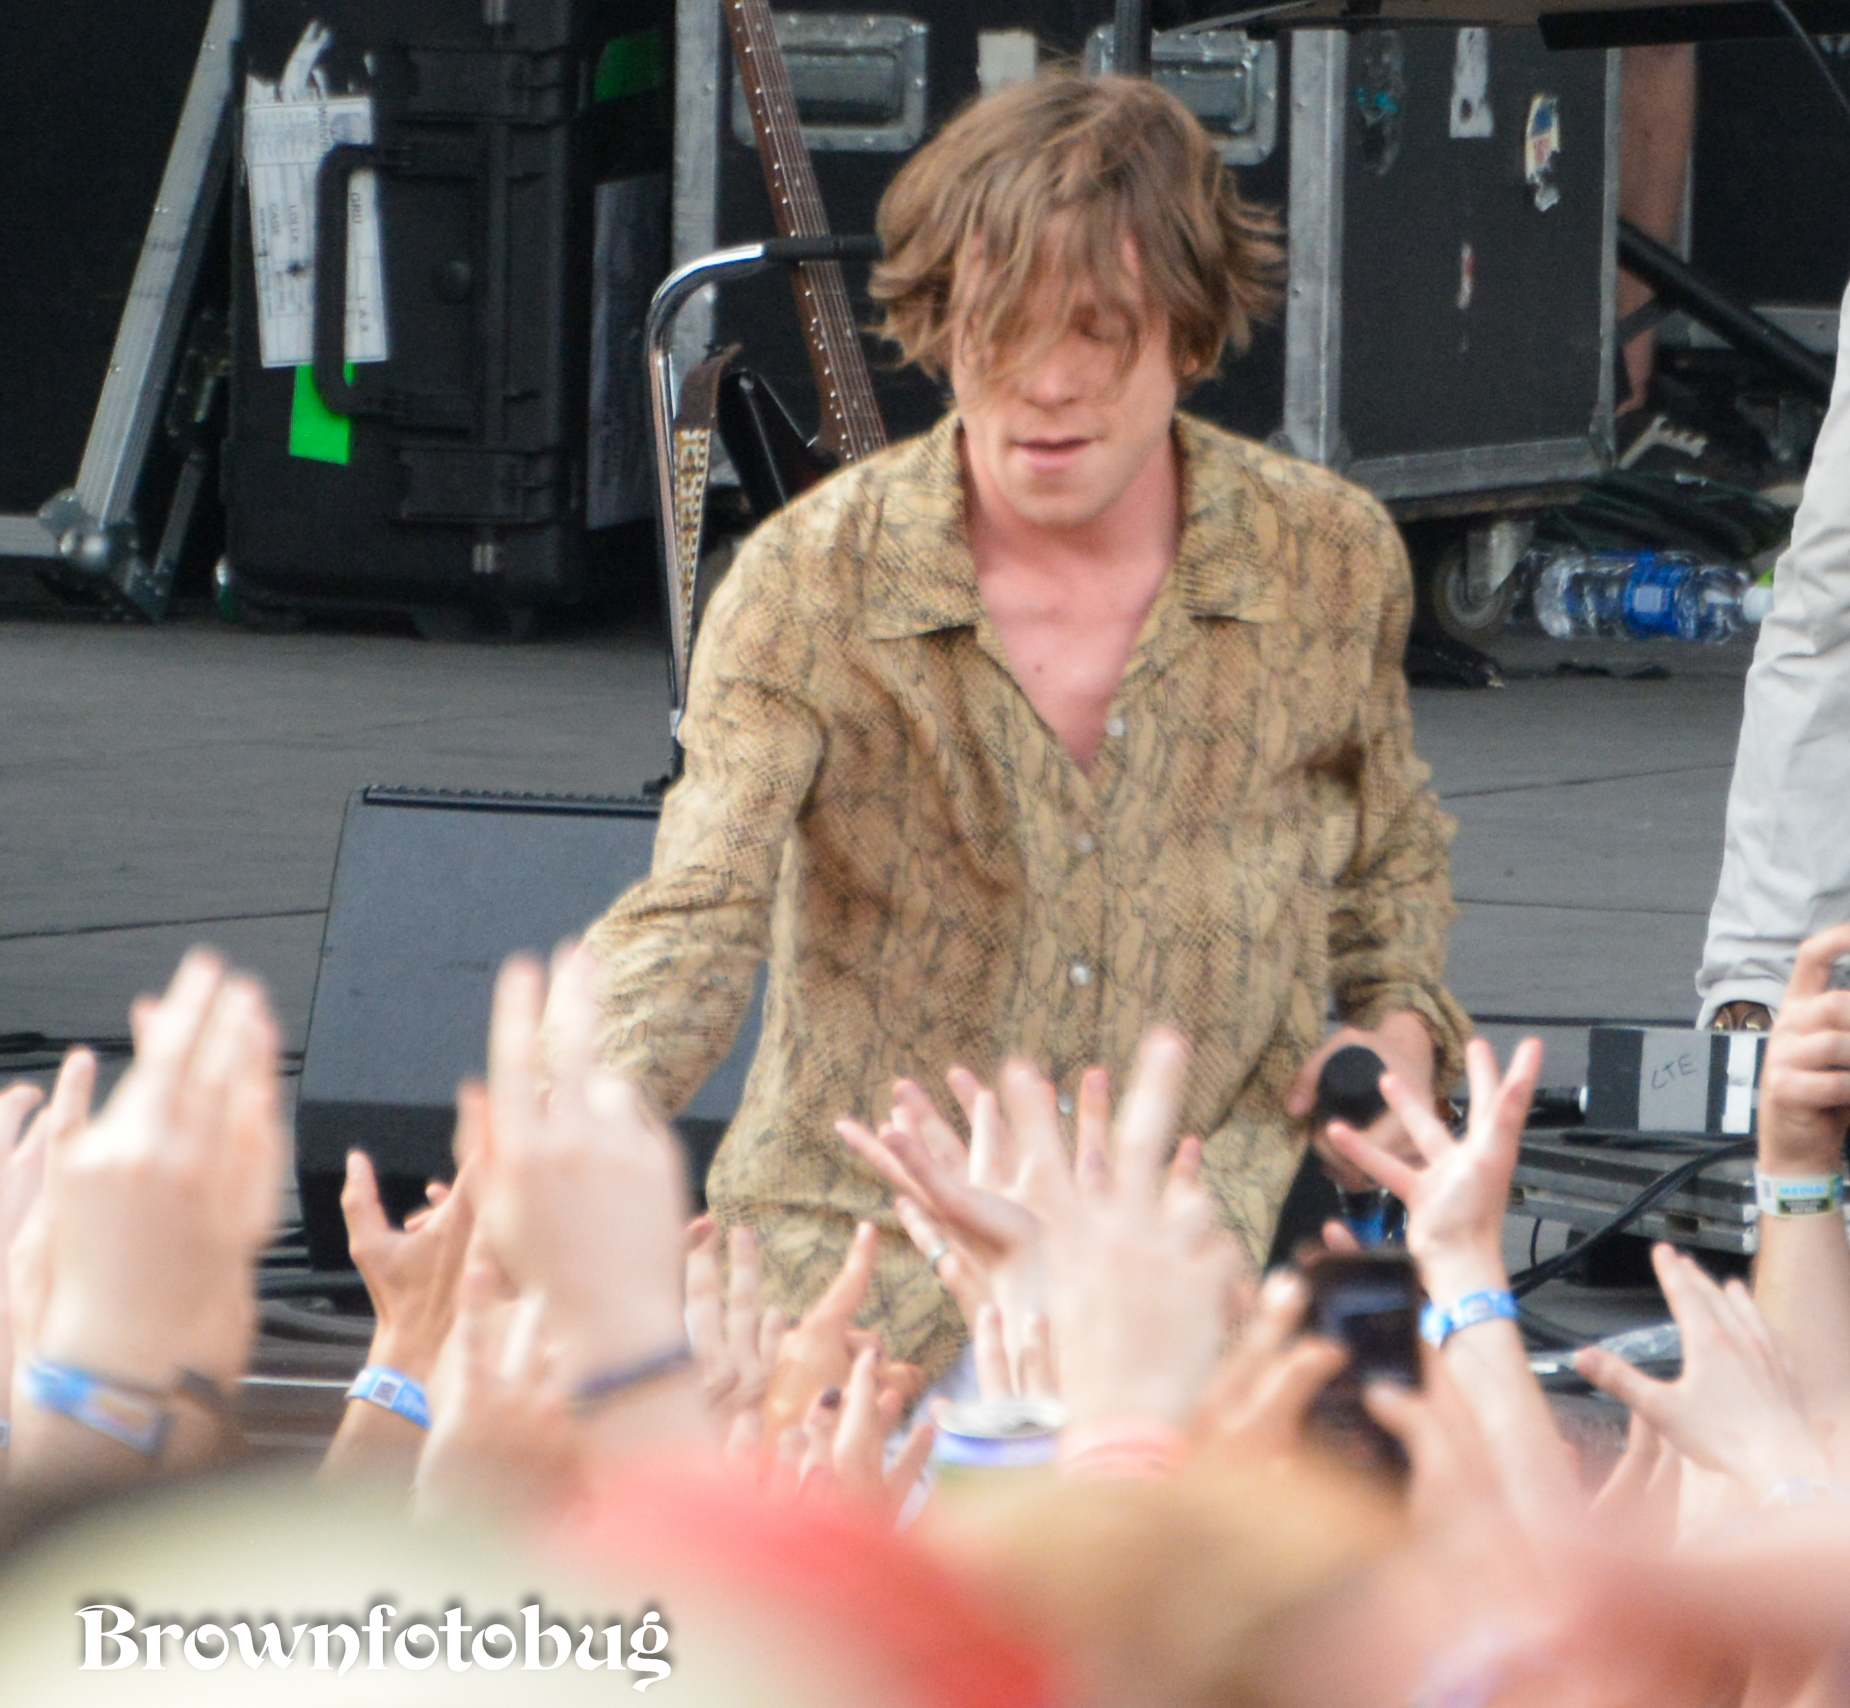 Cage the Elephant Sasquatch! Festival Day 1 (Photo by Arlene Brown)